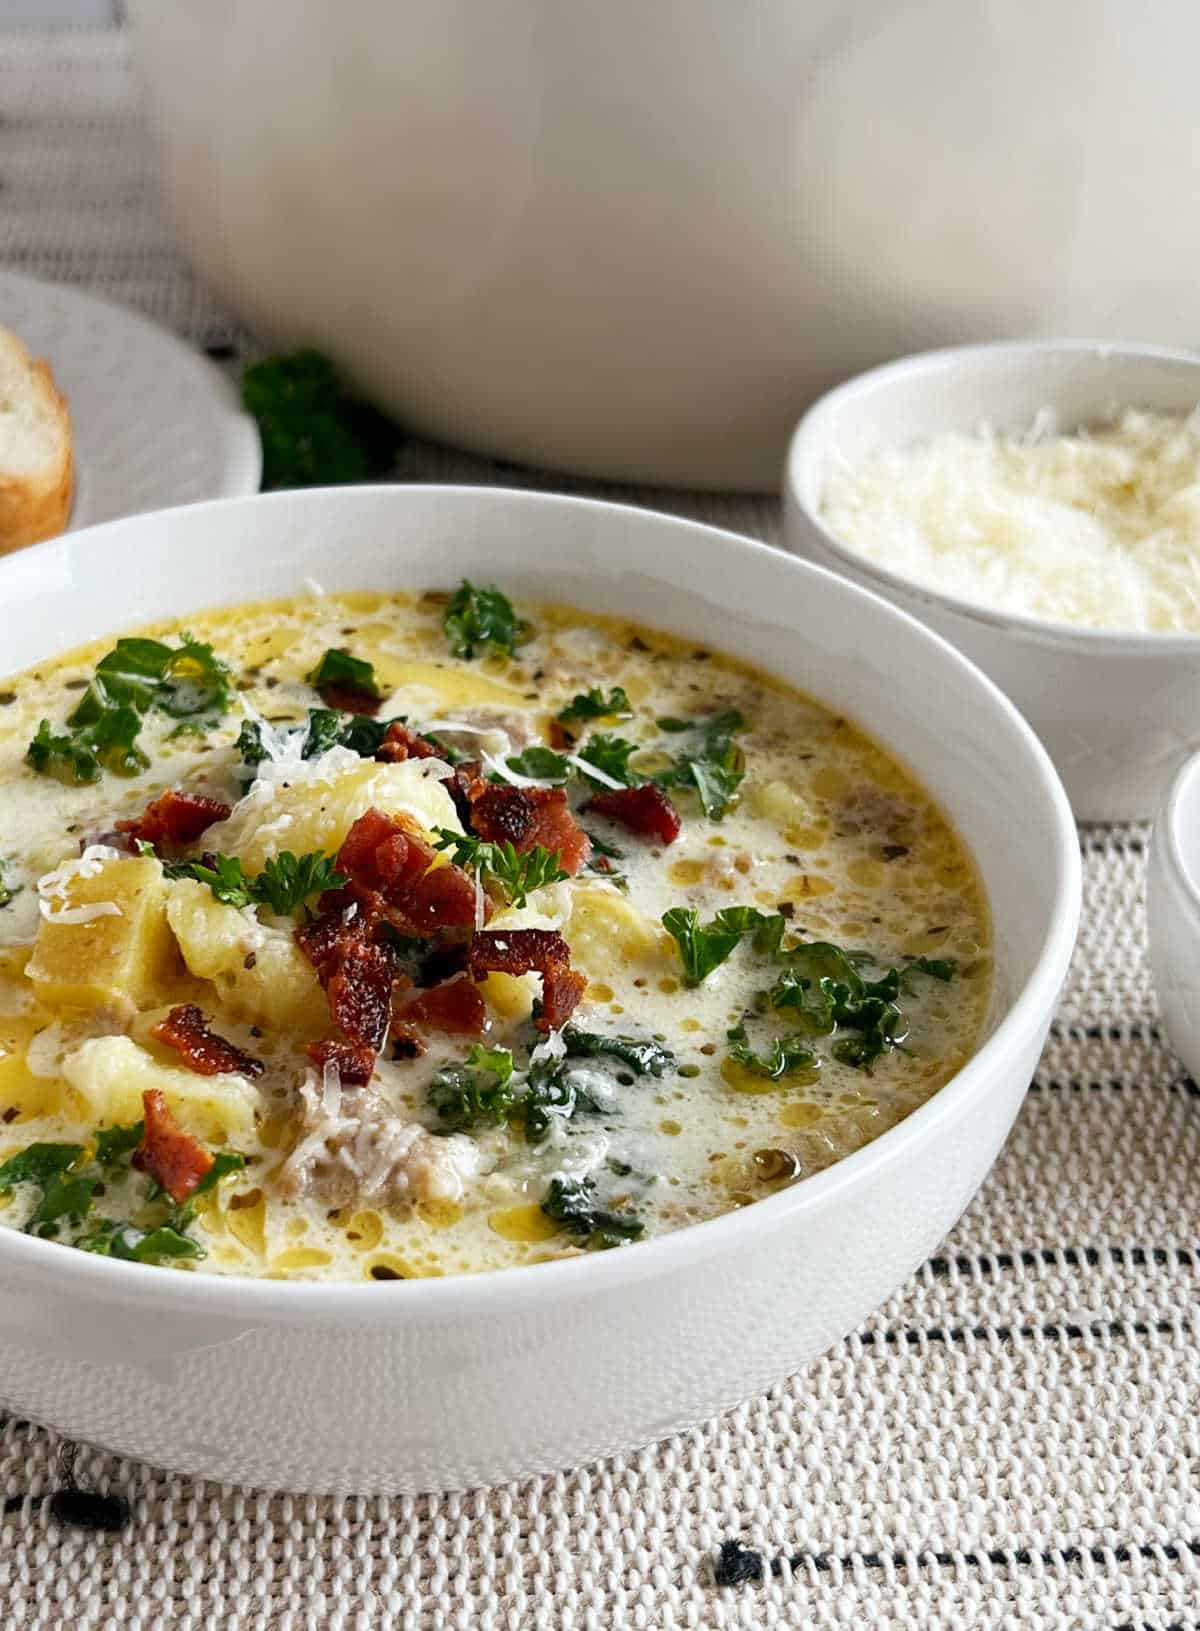 zuppa toscana soup with potatoes, sausage, bacon and kale in white bowl.